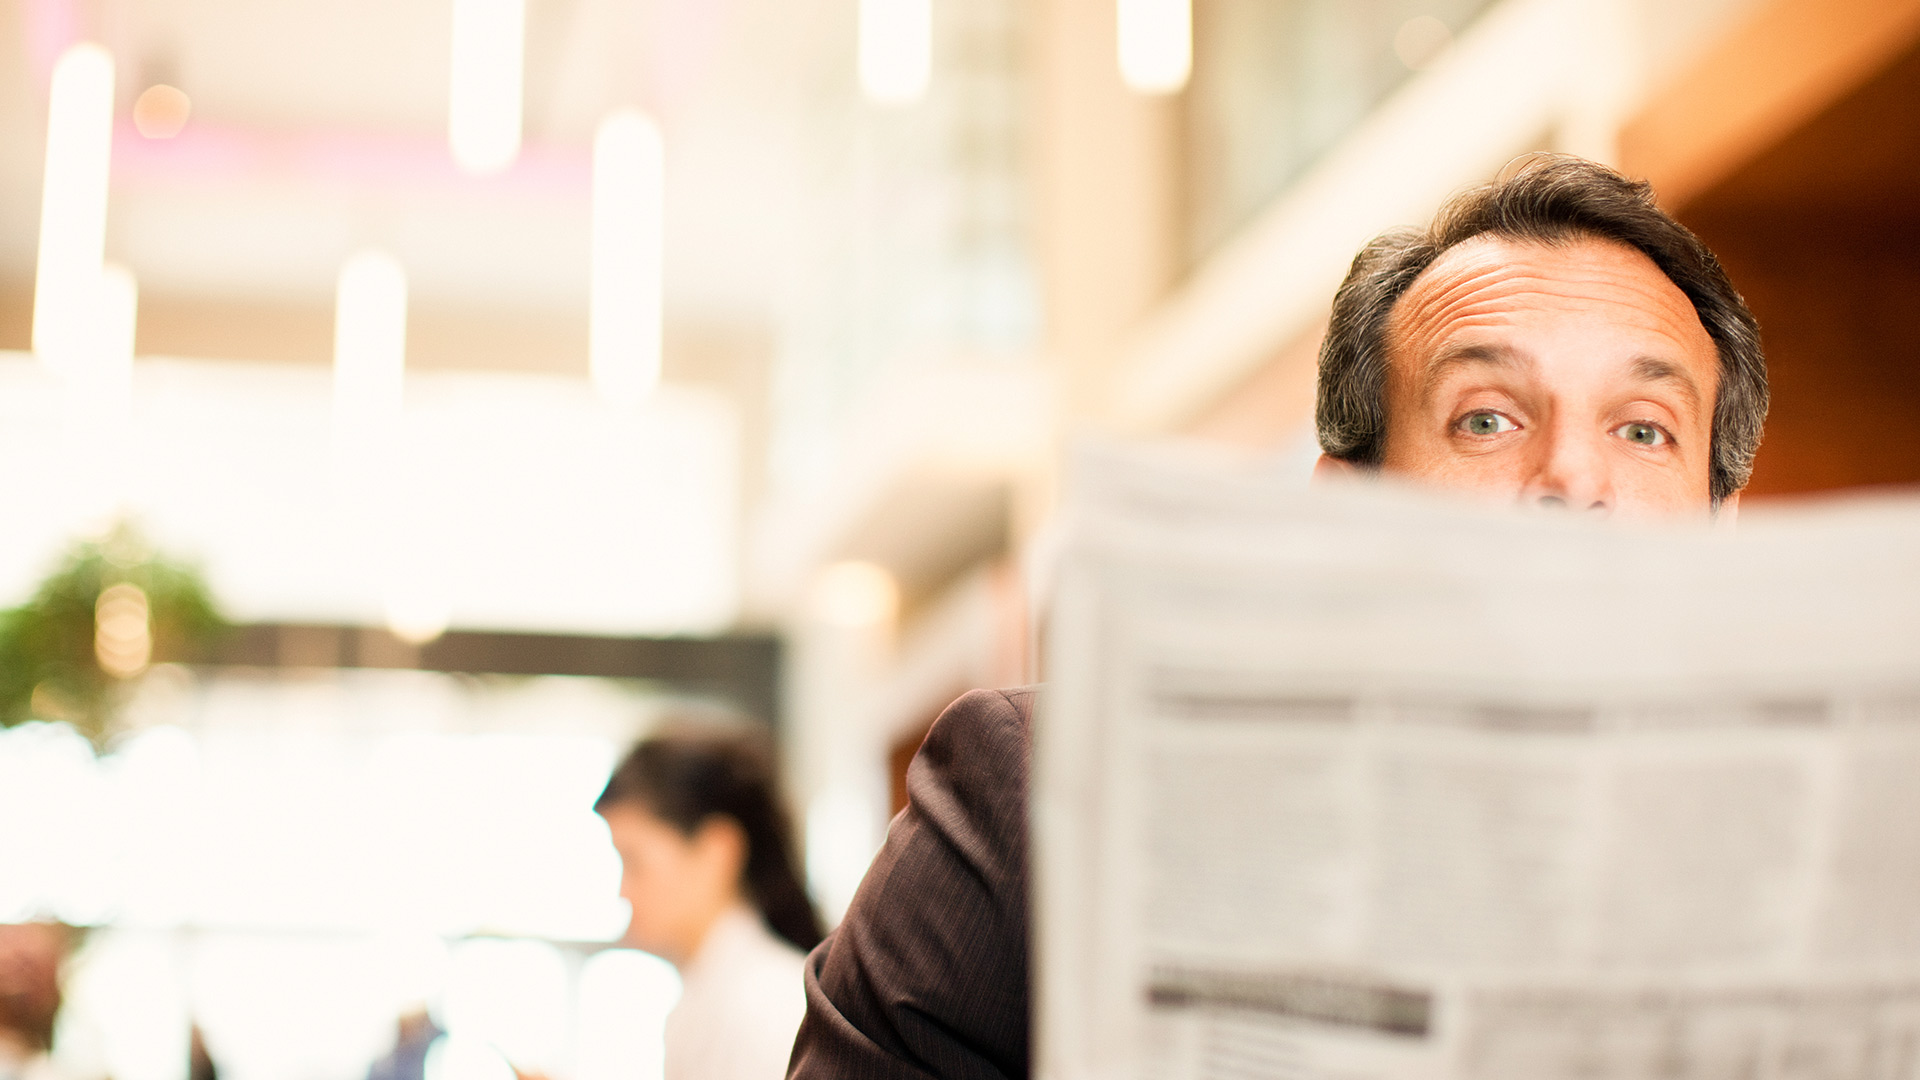 A man looks out from behind a newspaper